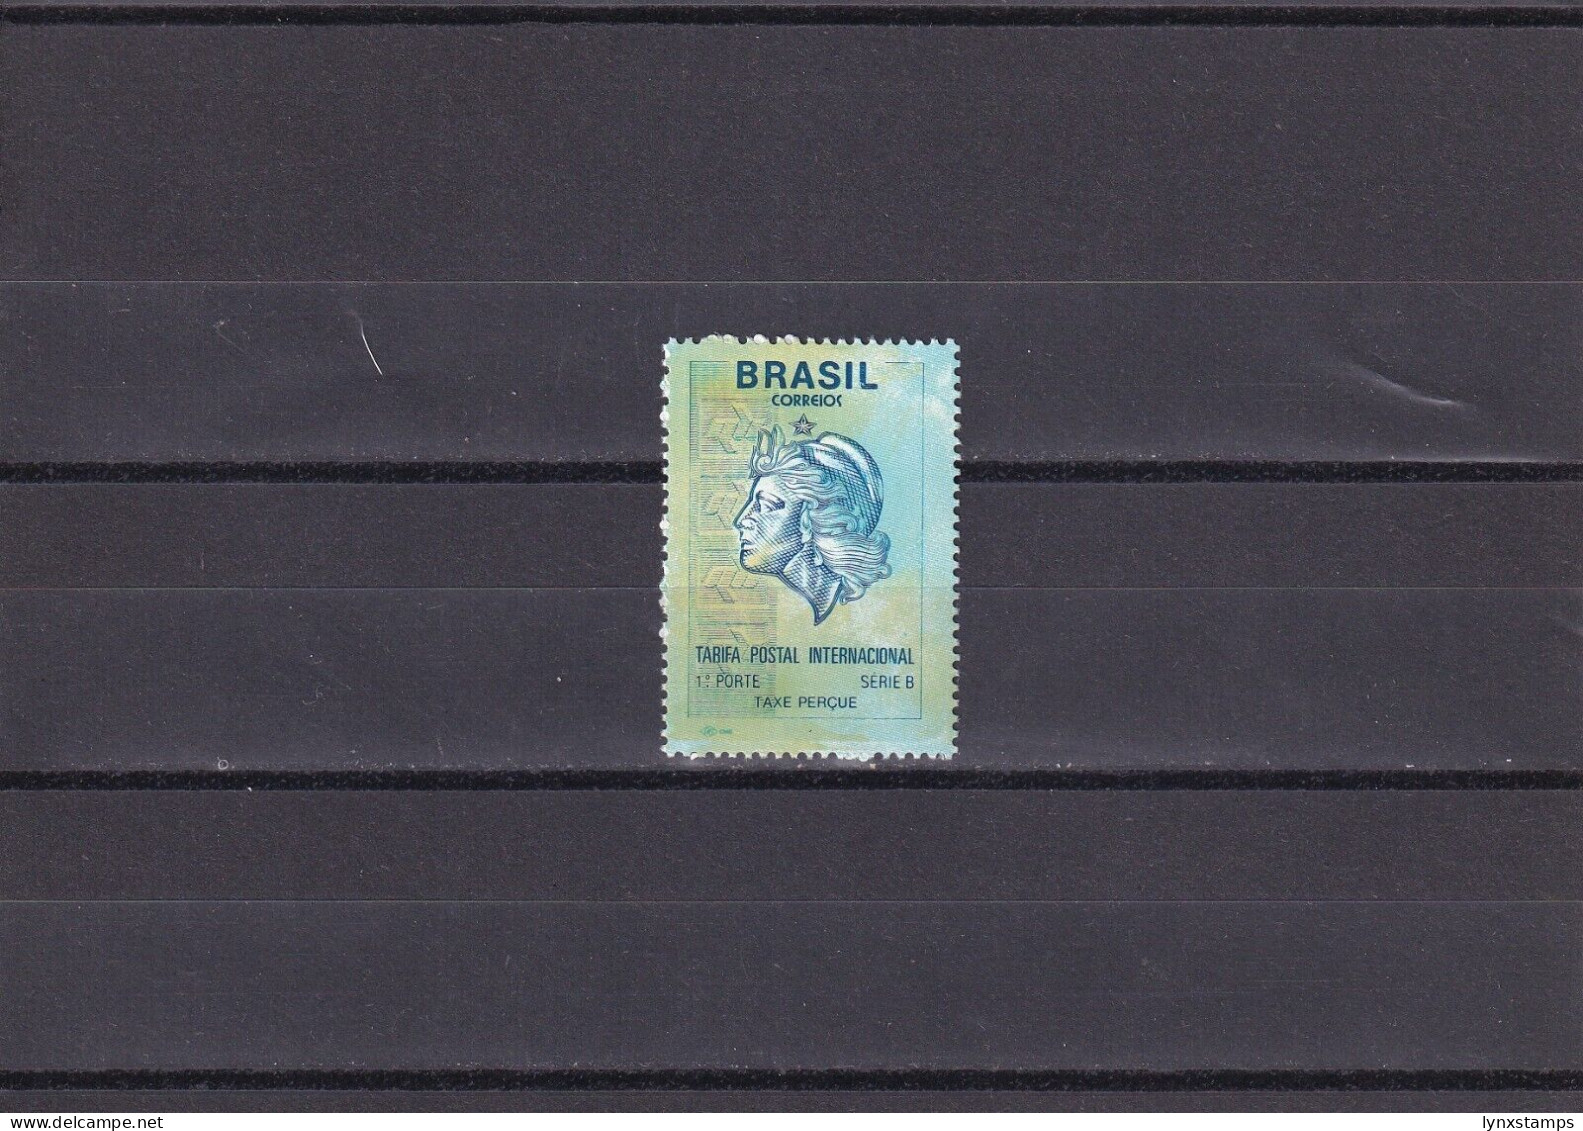 SA06 Brazil 1993 Stamp With No Value Expressed Mint Stamp - Unused Stamps